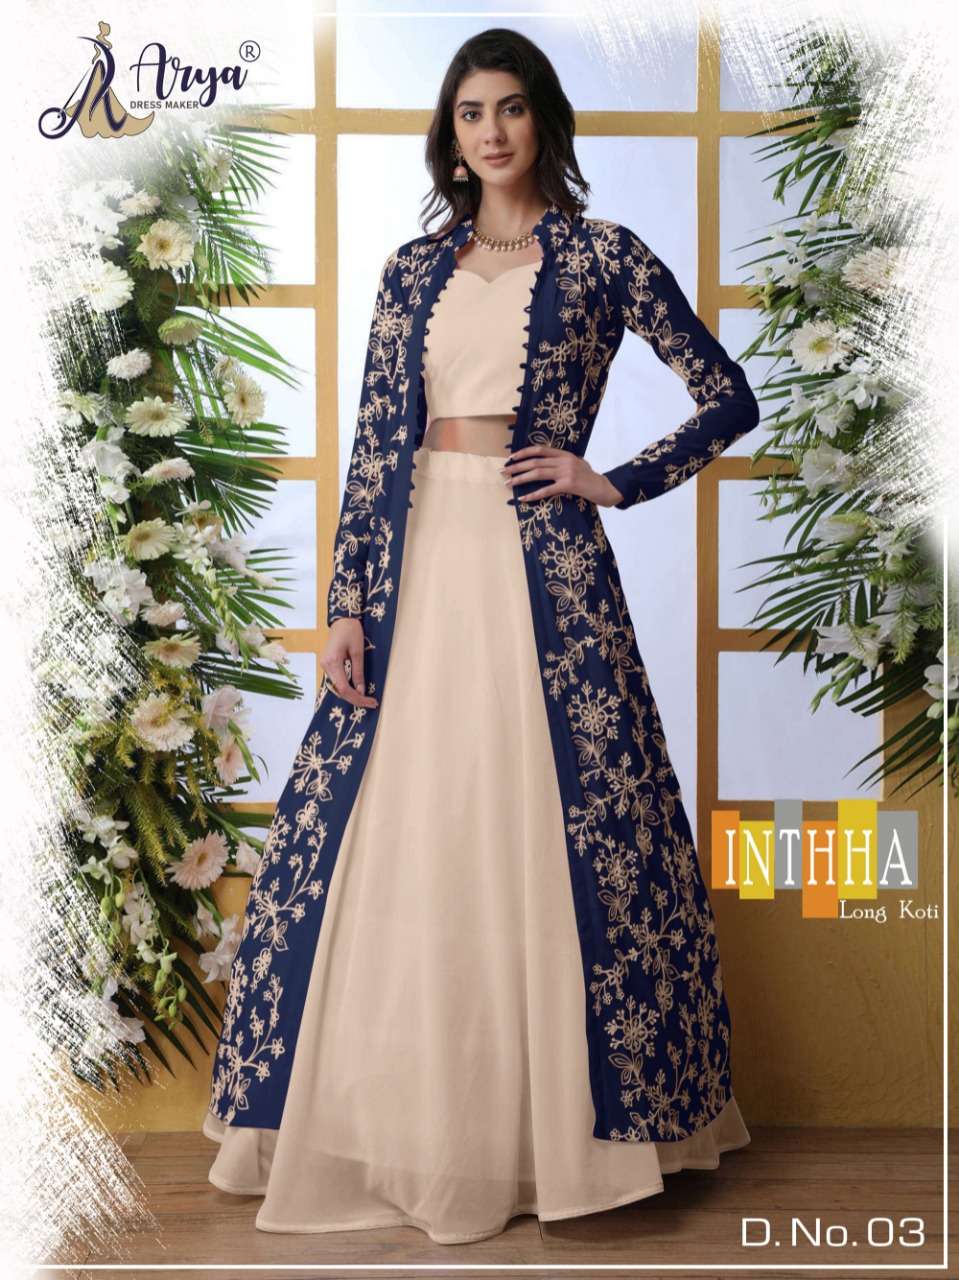 Buy Now Latest Premium Quality RAJANI GEORGETTE GOWN AND KOTI FOR CHILDREN  At Arya Dress Maker Top Manufacturer And Wholesaler Surat India